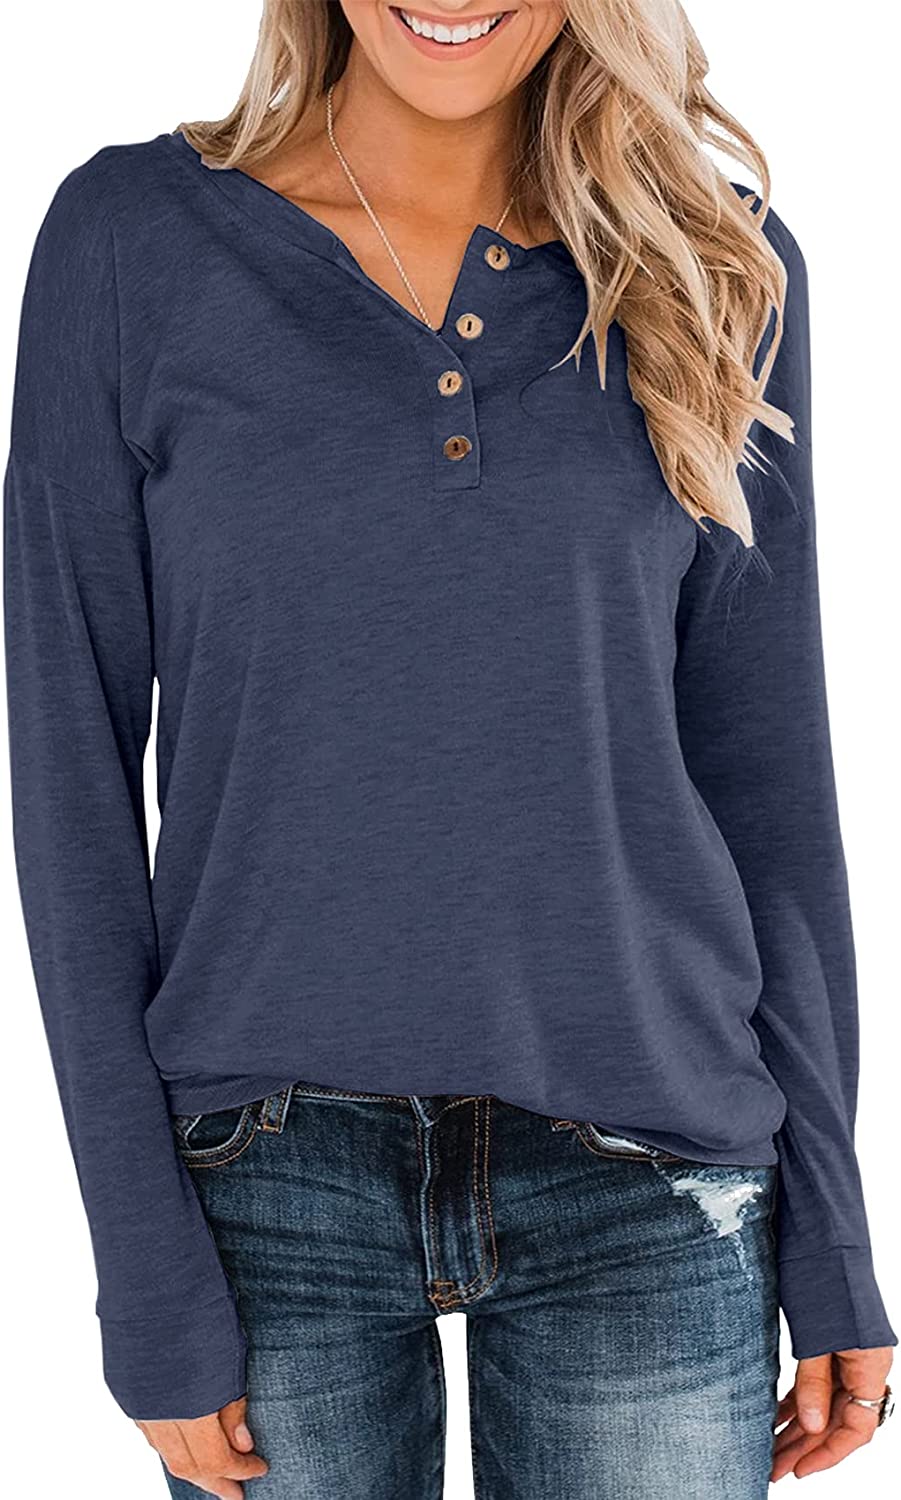 Topstype Women's Long Sleeve Henley Tops Pullover with Buttons Down Casual  Loose | eBay